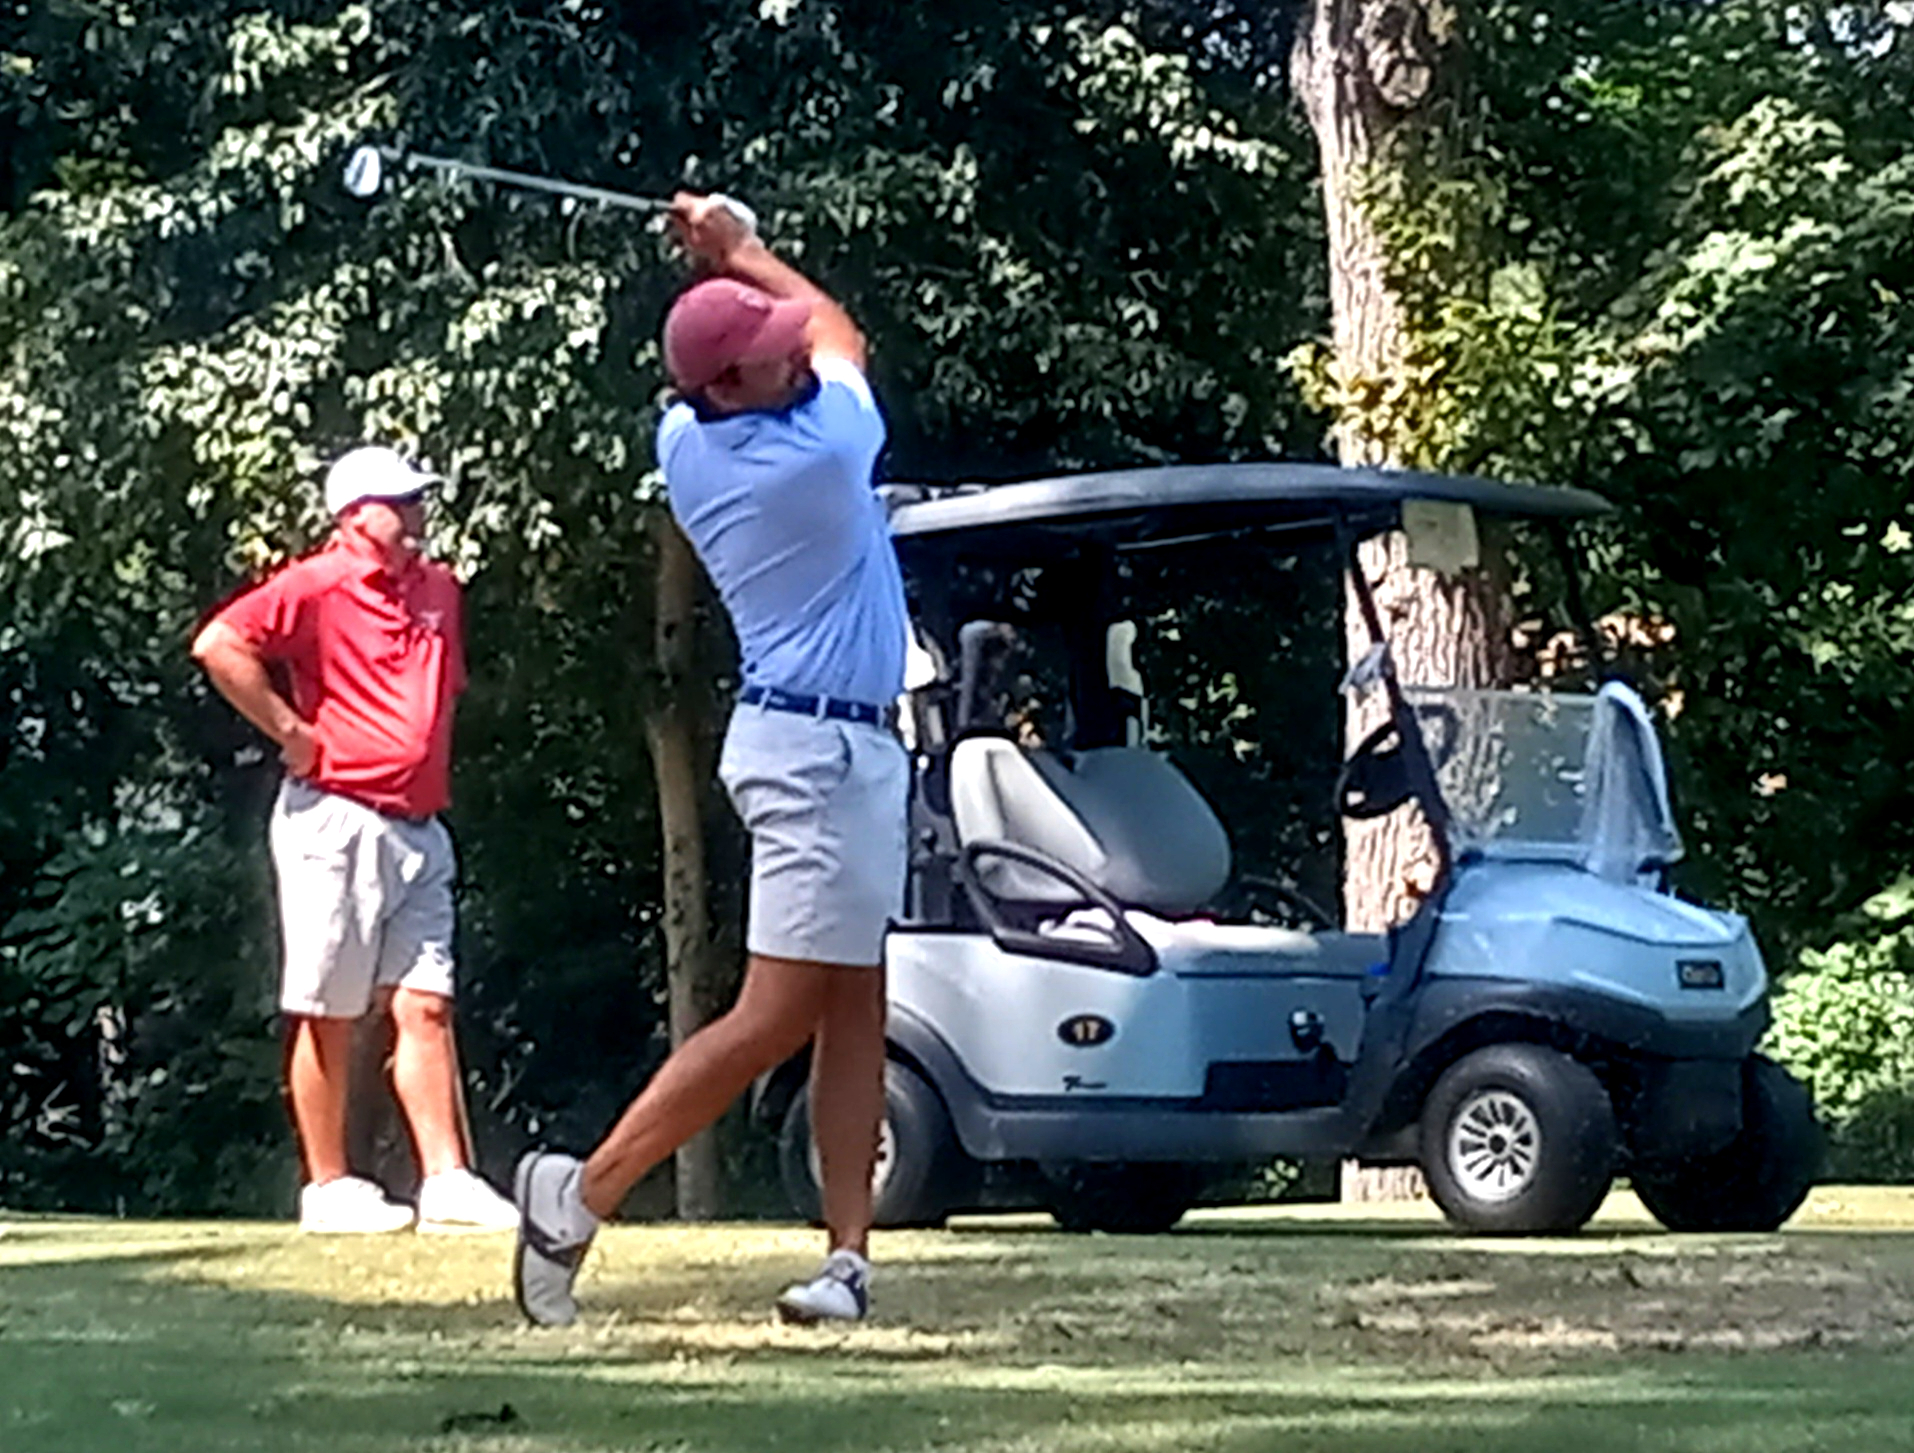 Jackson King tees off on Anniston Country Club’s No. 3 hole during Sunday’s final round of the Sunny King Charity Classic. (Photo by Joe Medley/East Alabama Sports Today)